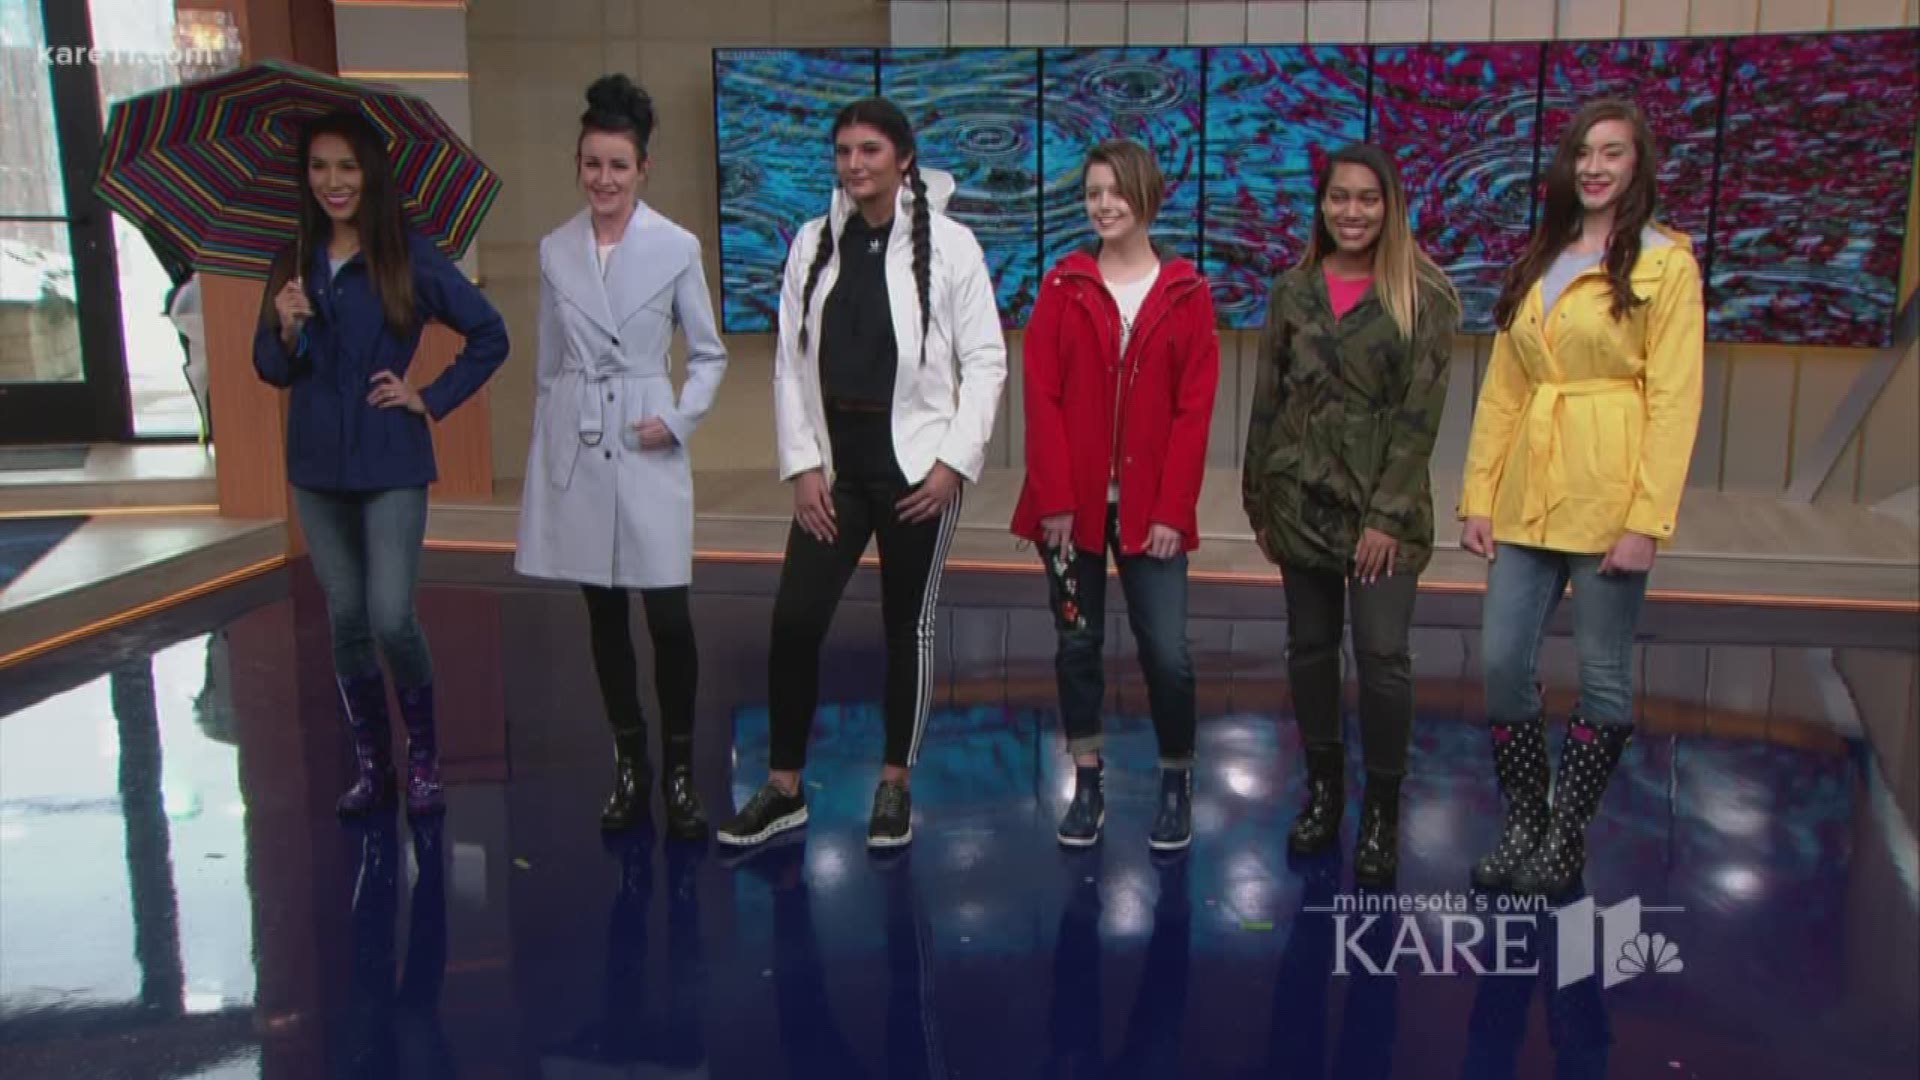 Sara Rogers stops in to share a variety of stylish rain jackets and rain boots that you can pick up at the Mall of America in time for when the rain showers come!